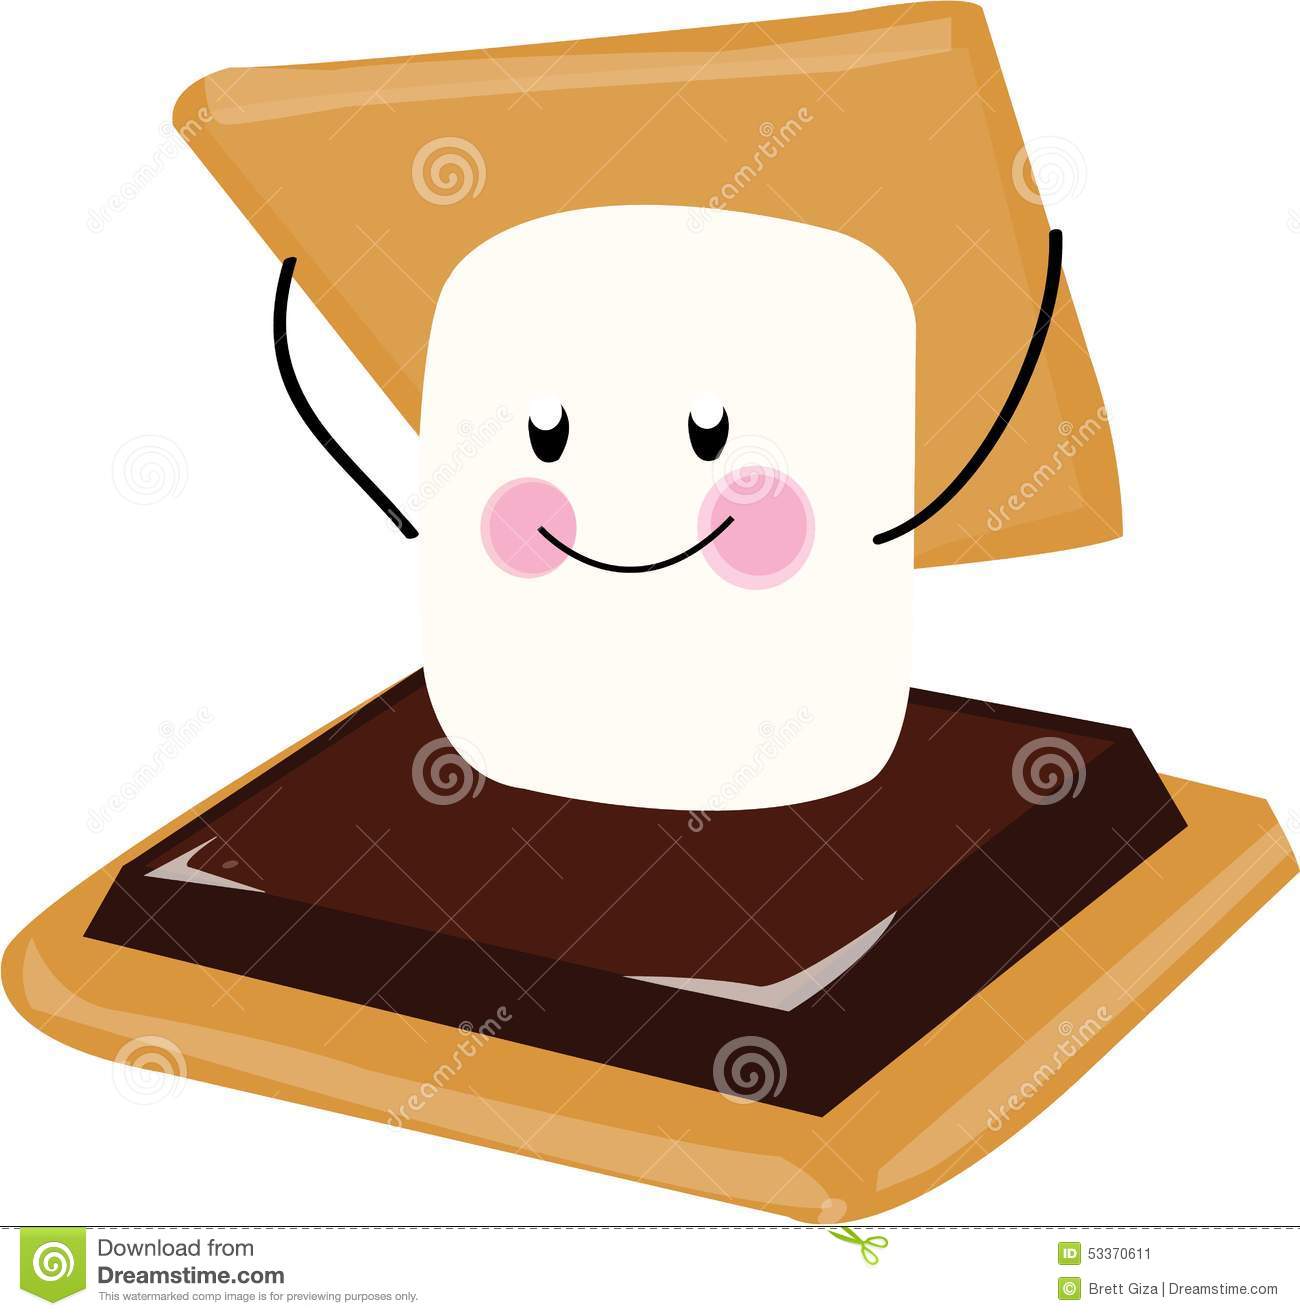 Free download best on. Smores clipart cute